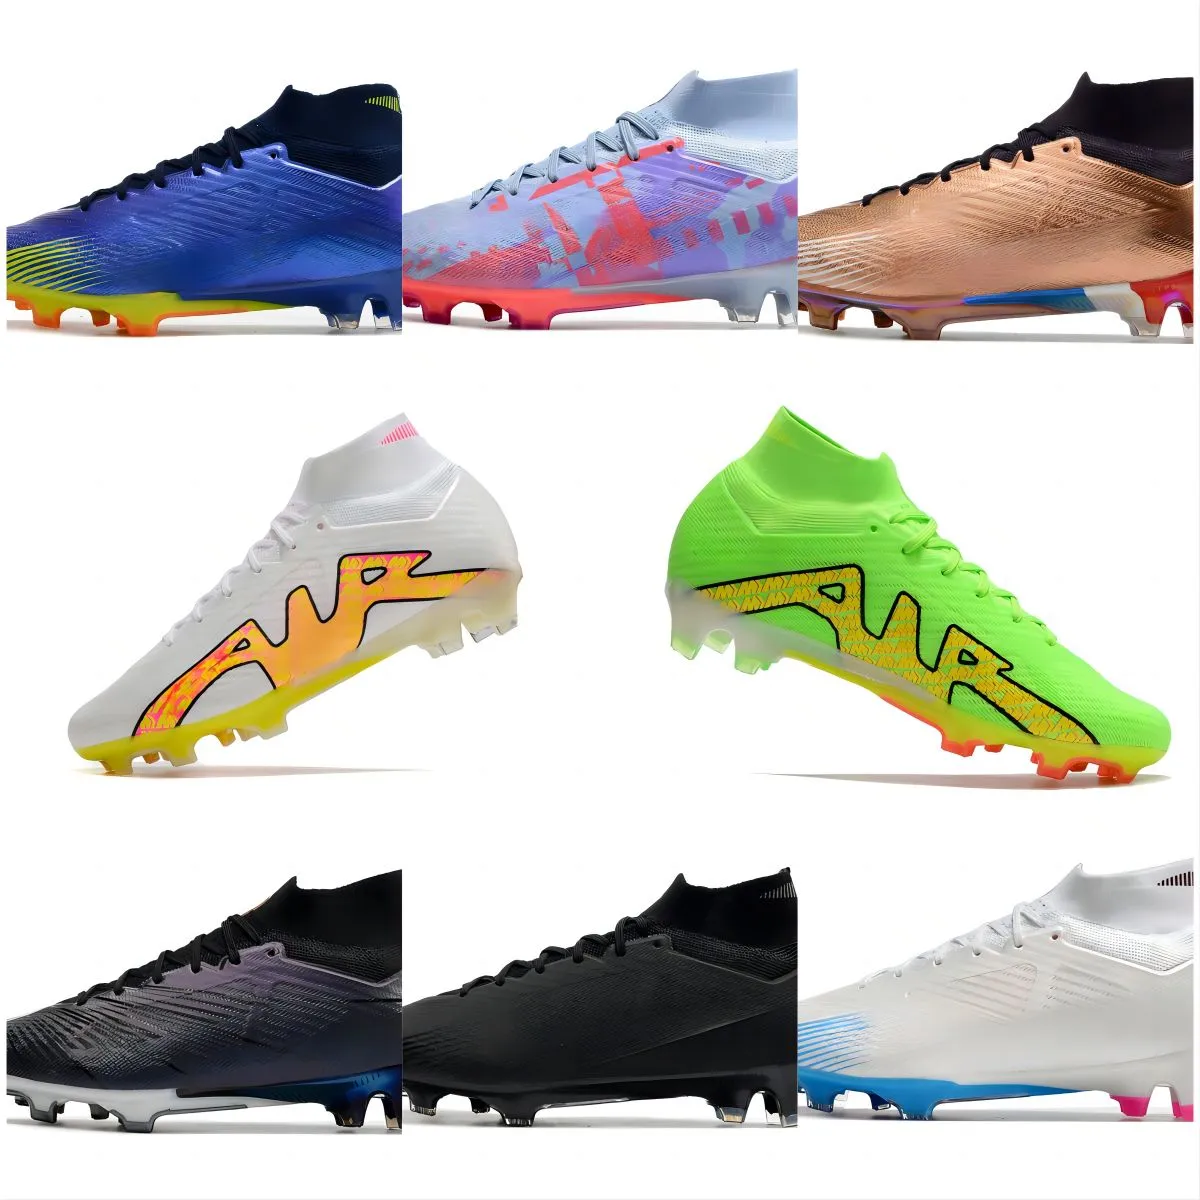 Chaussures de football Football White Bonded Barely high SHOES Assassin Green Mbappe Pack Cleat Cleats Zooms Mercurial Superfly Blueprint Fg Cristiano taille 39-45 avec boîte